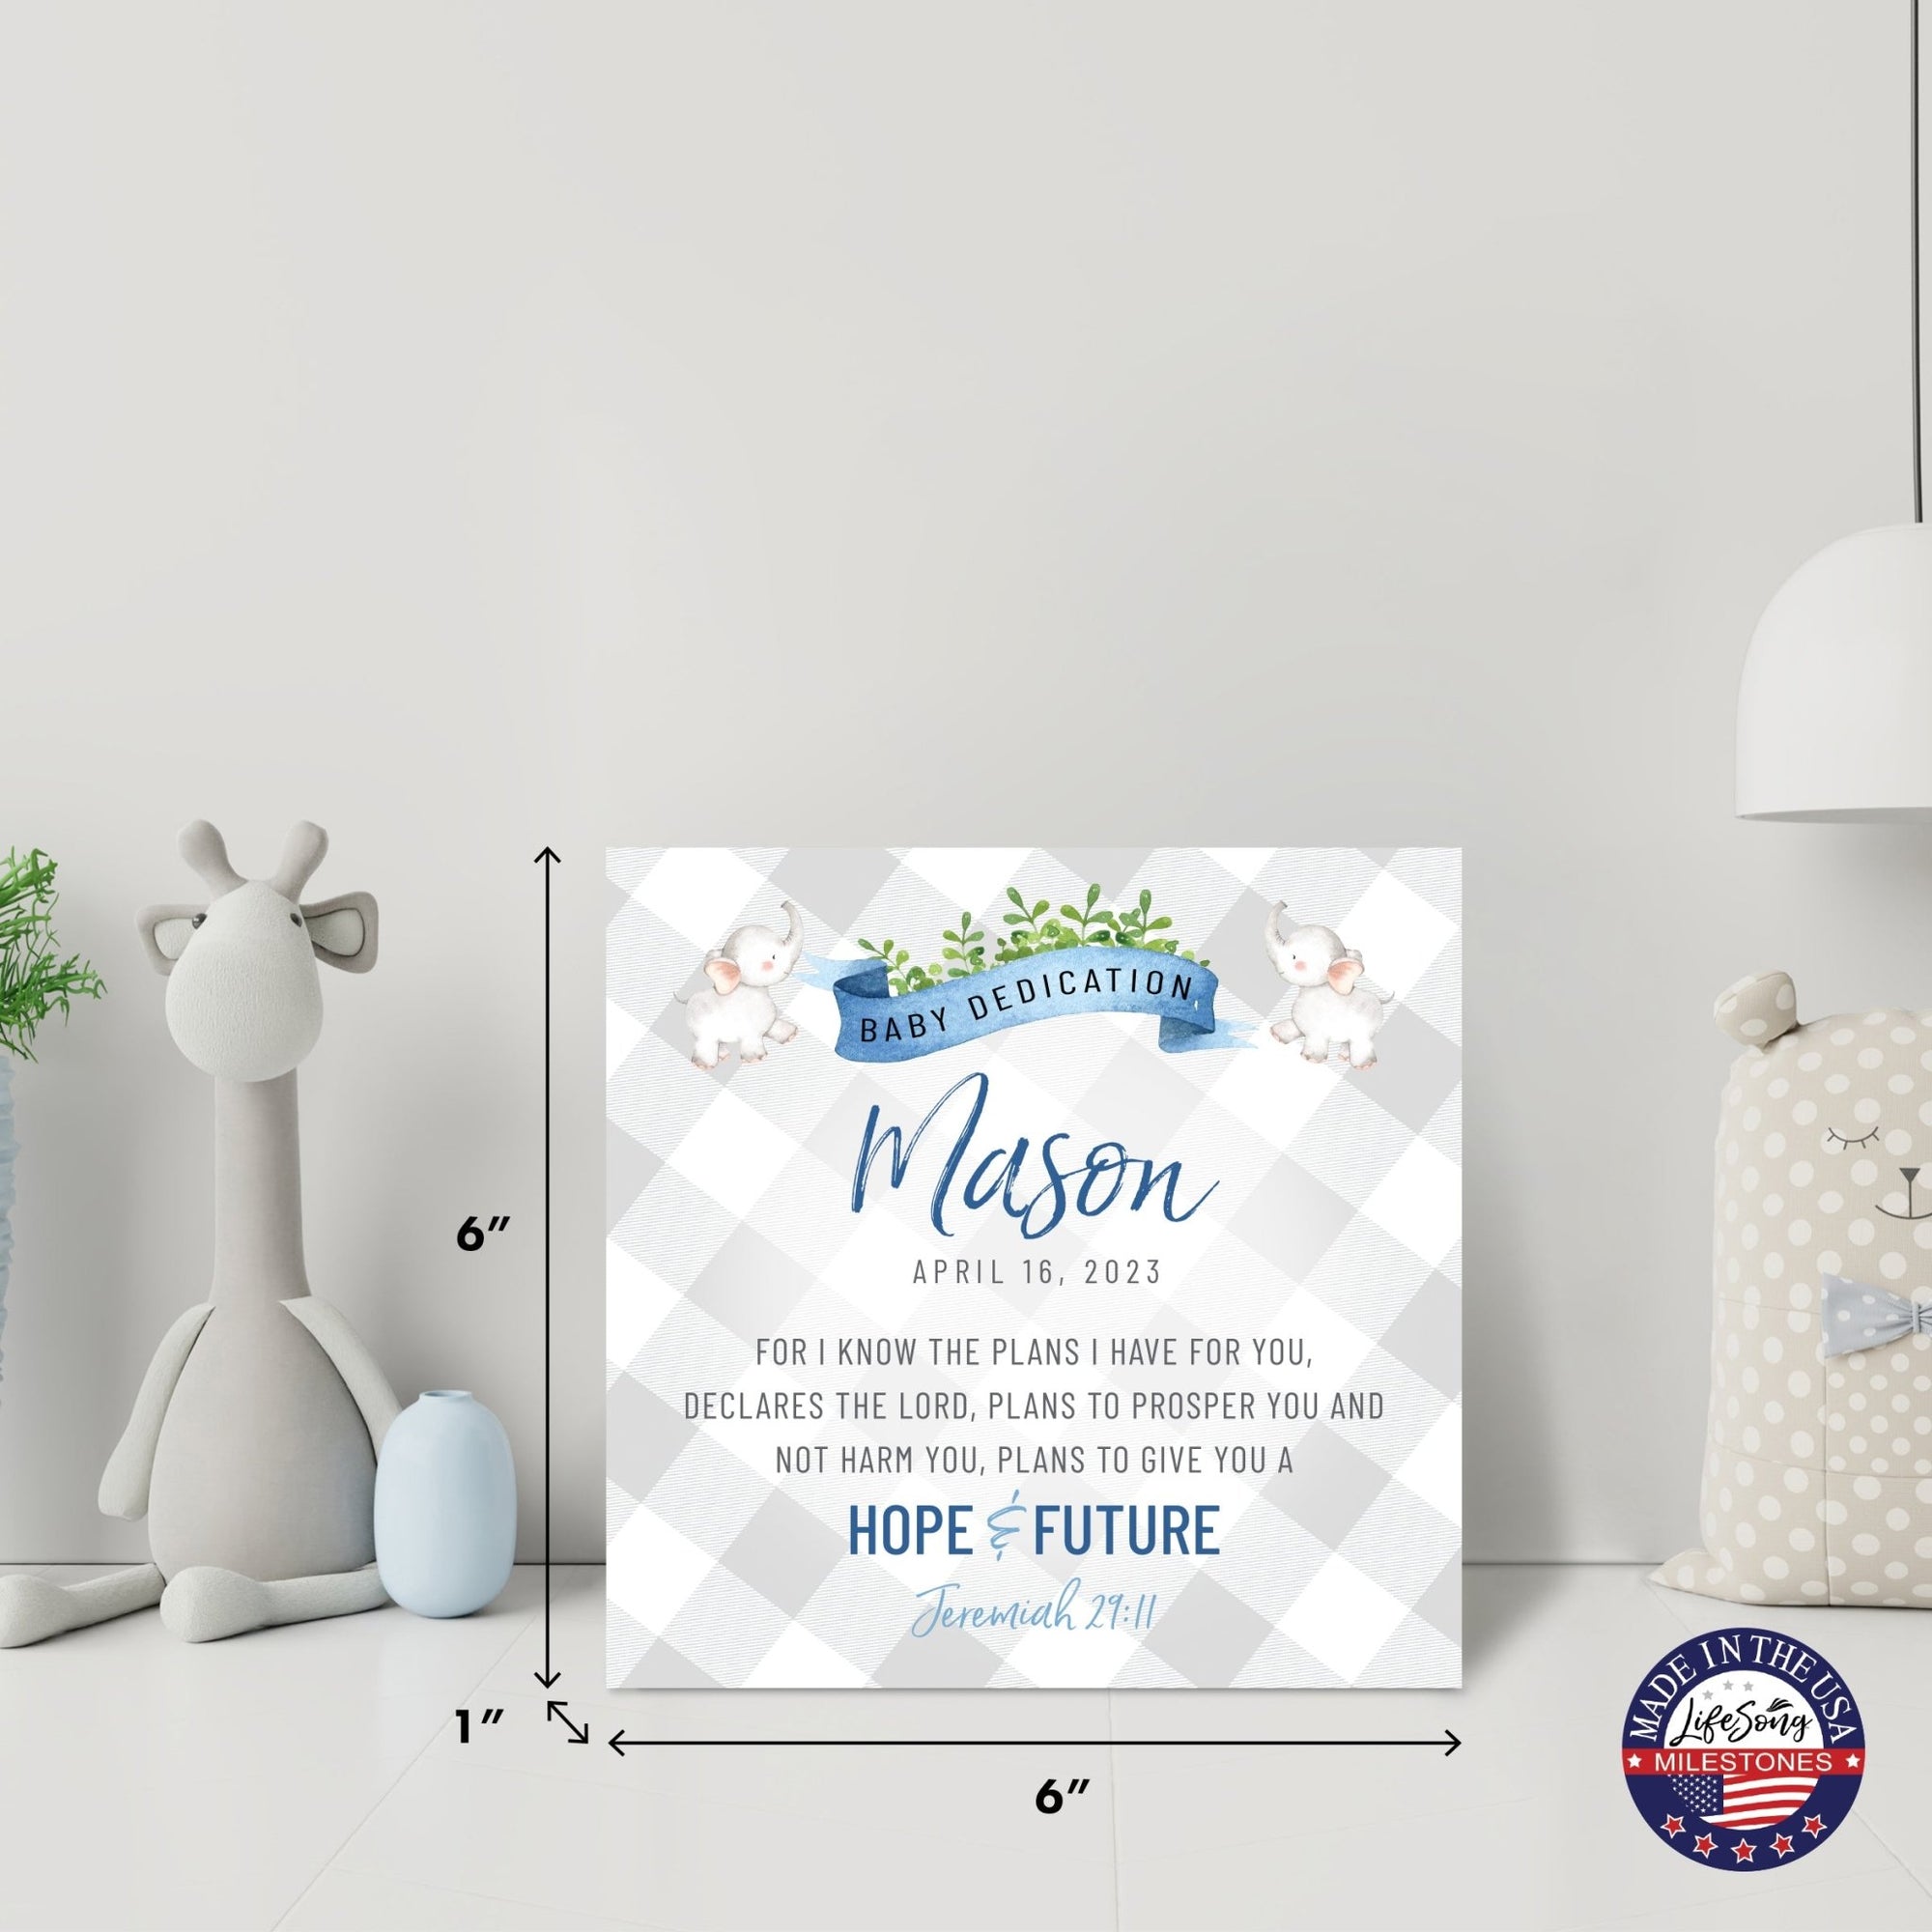 Personalized Shelf Décor and Tabletop Signs for Baby Dedication - LifeSong Milestones